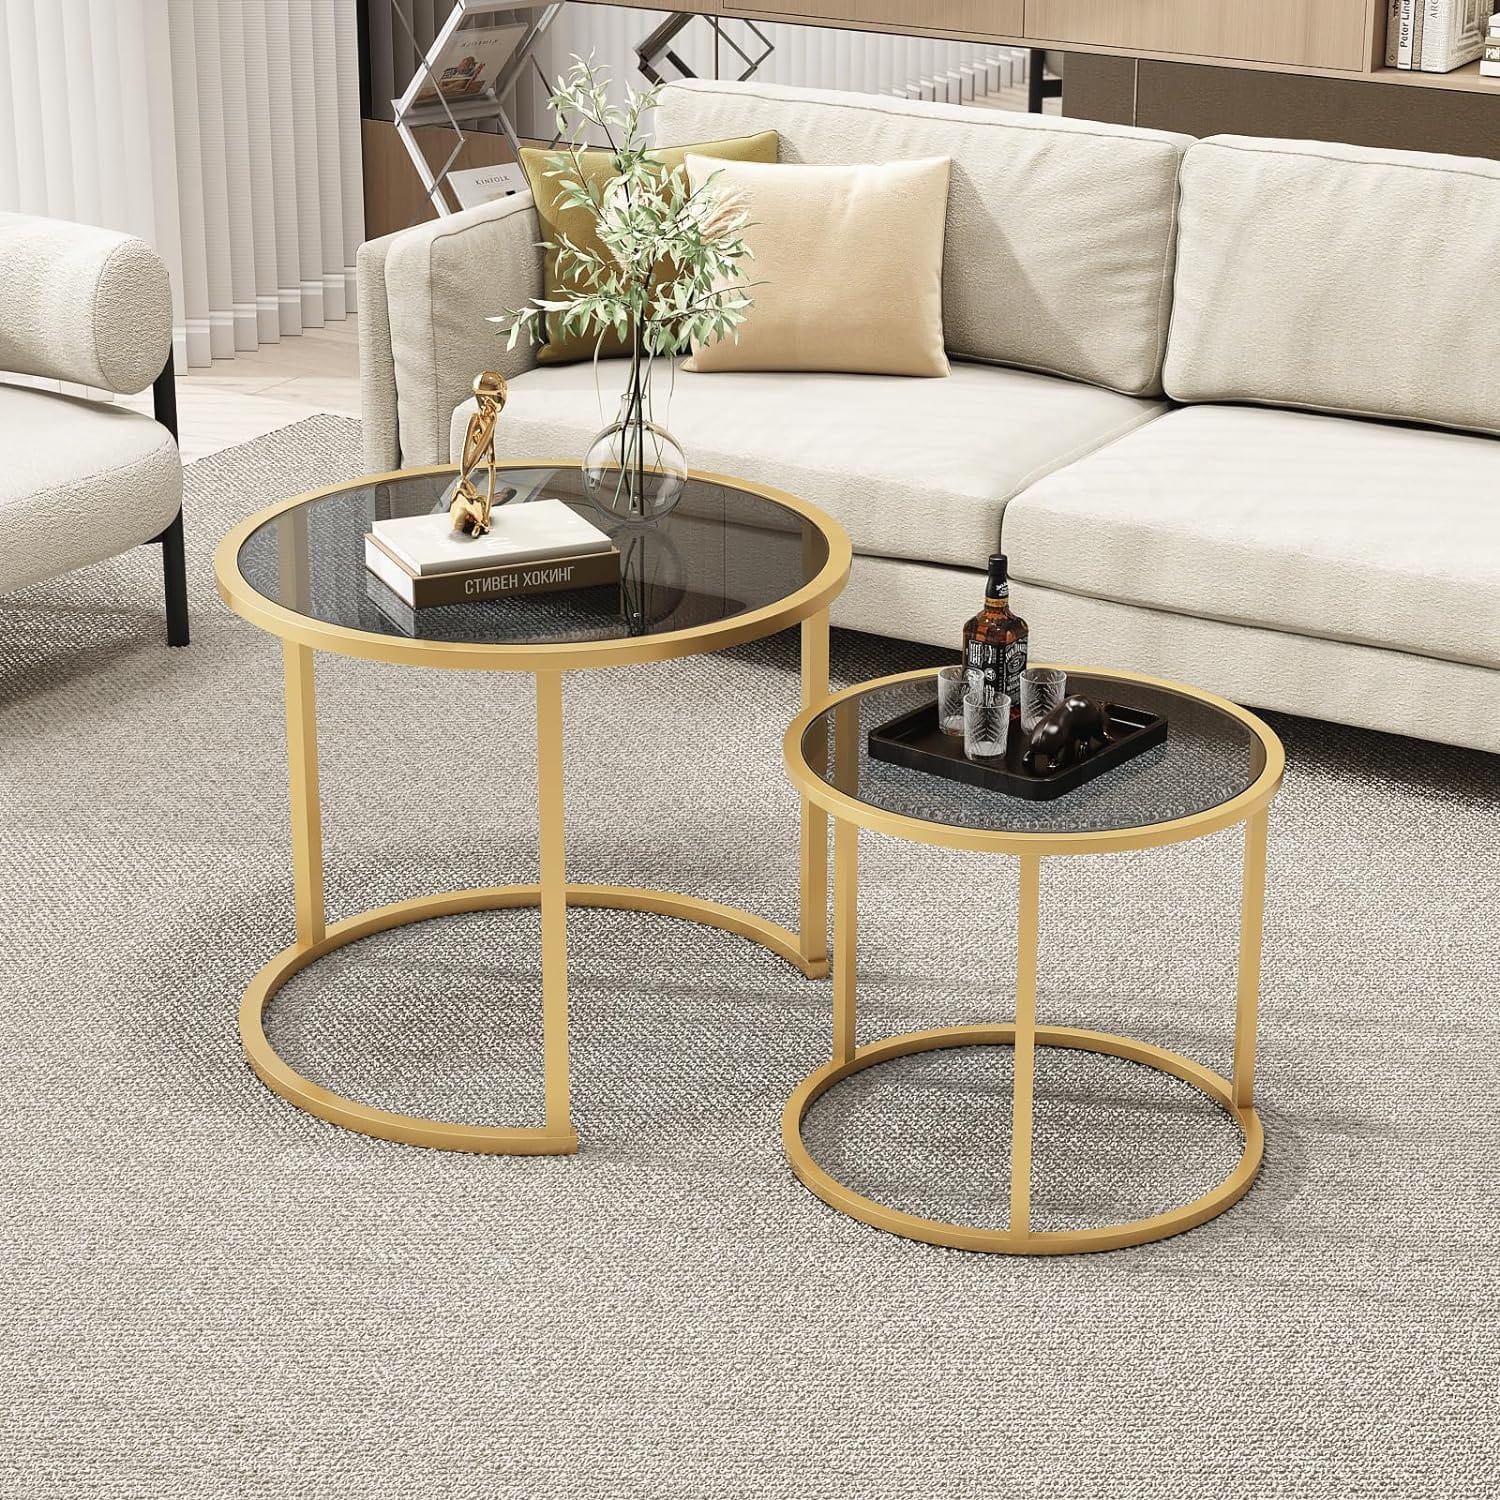 Gold Nesting Coffee Table Set of 2, Modern Tempered Glass Side Table, Metal Frame Table for Living Room, Office,Home Decor